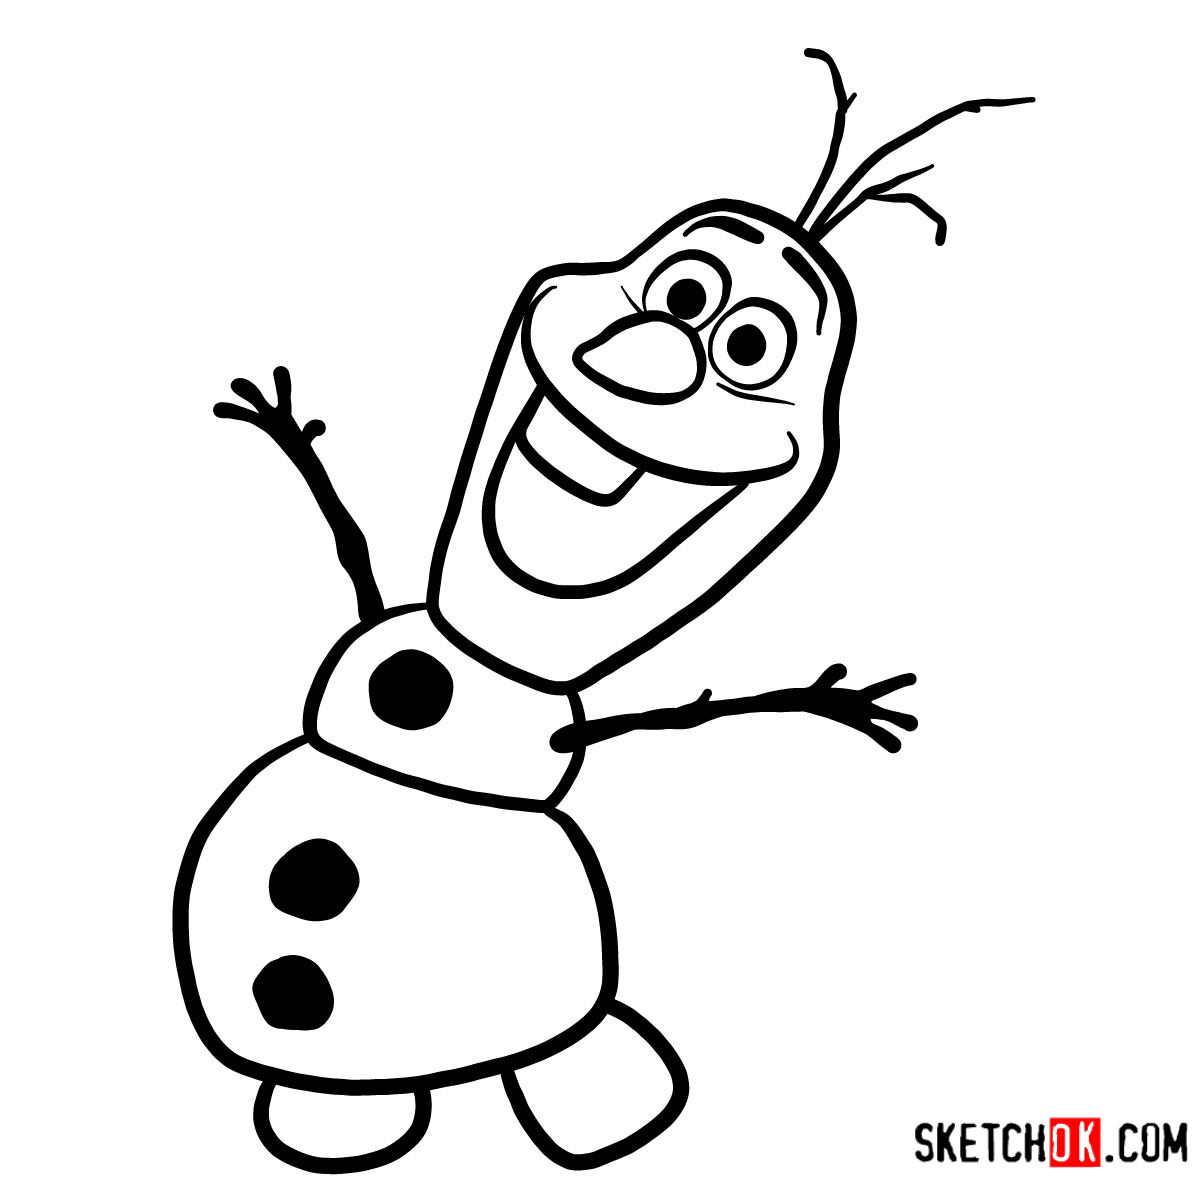 How to draw happy Olaf | Frozen - Sketchok easy drawing guides